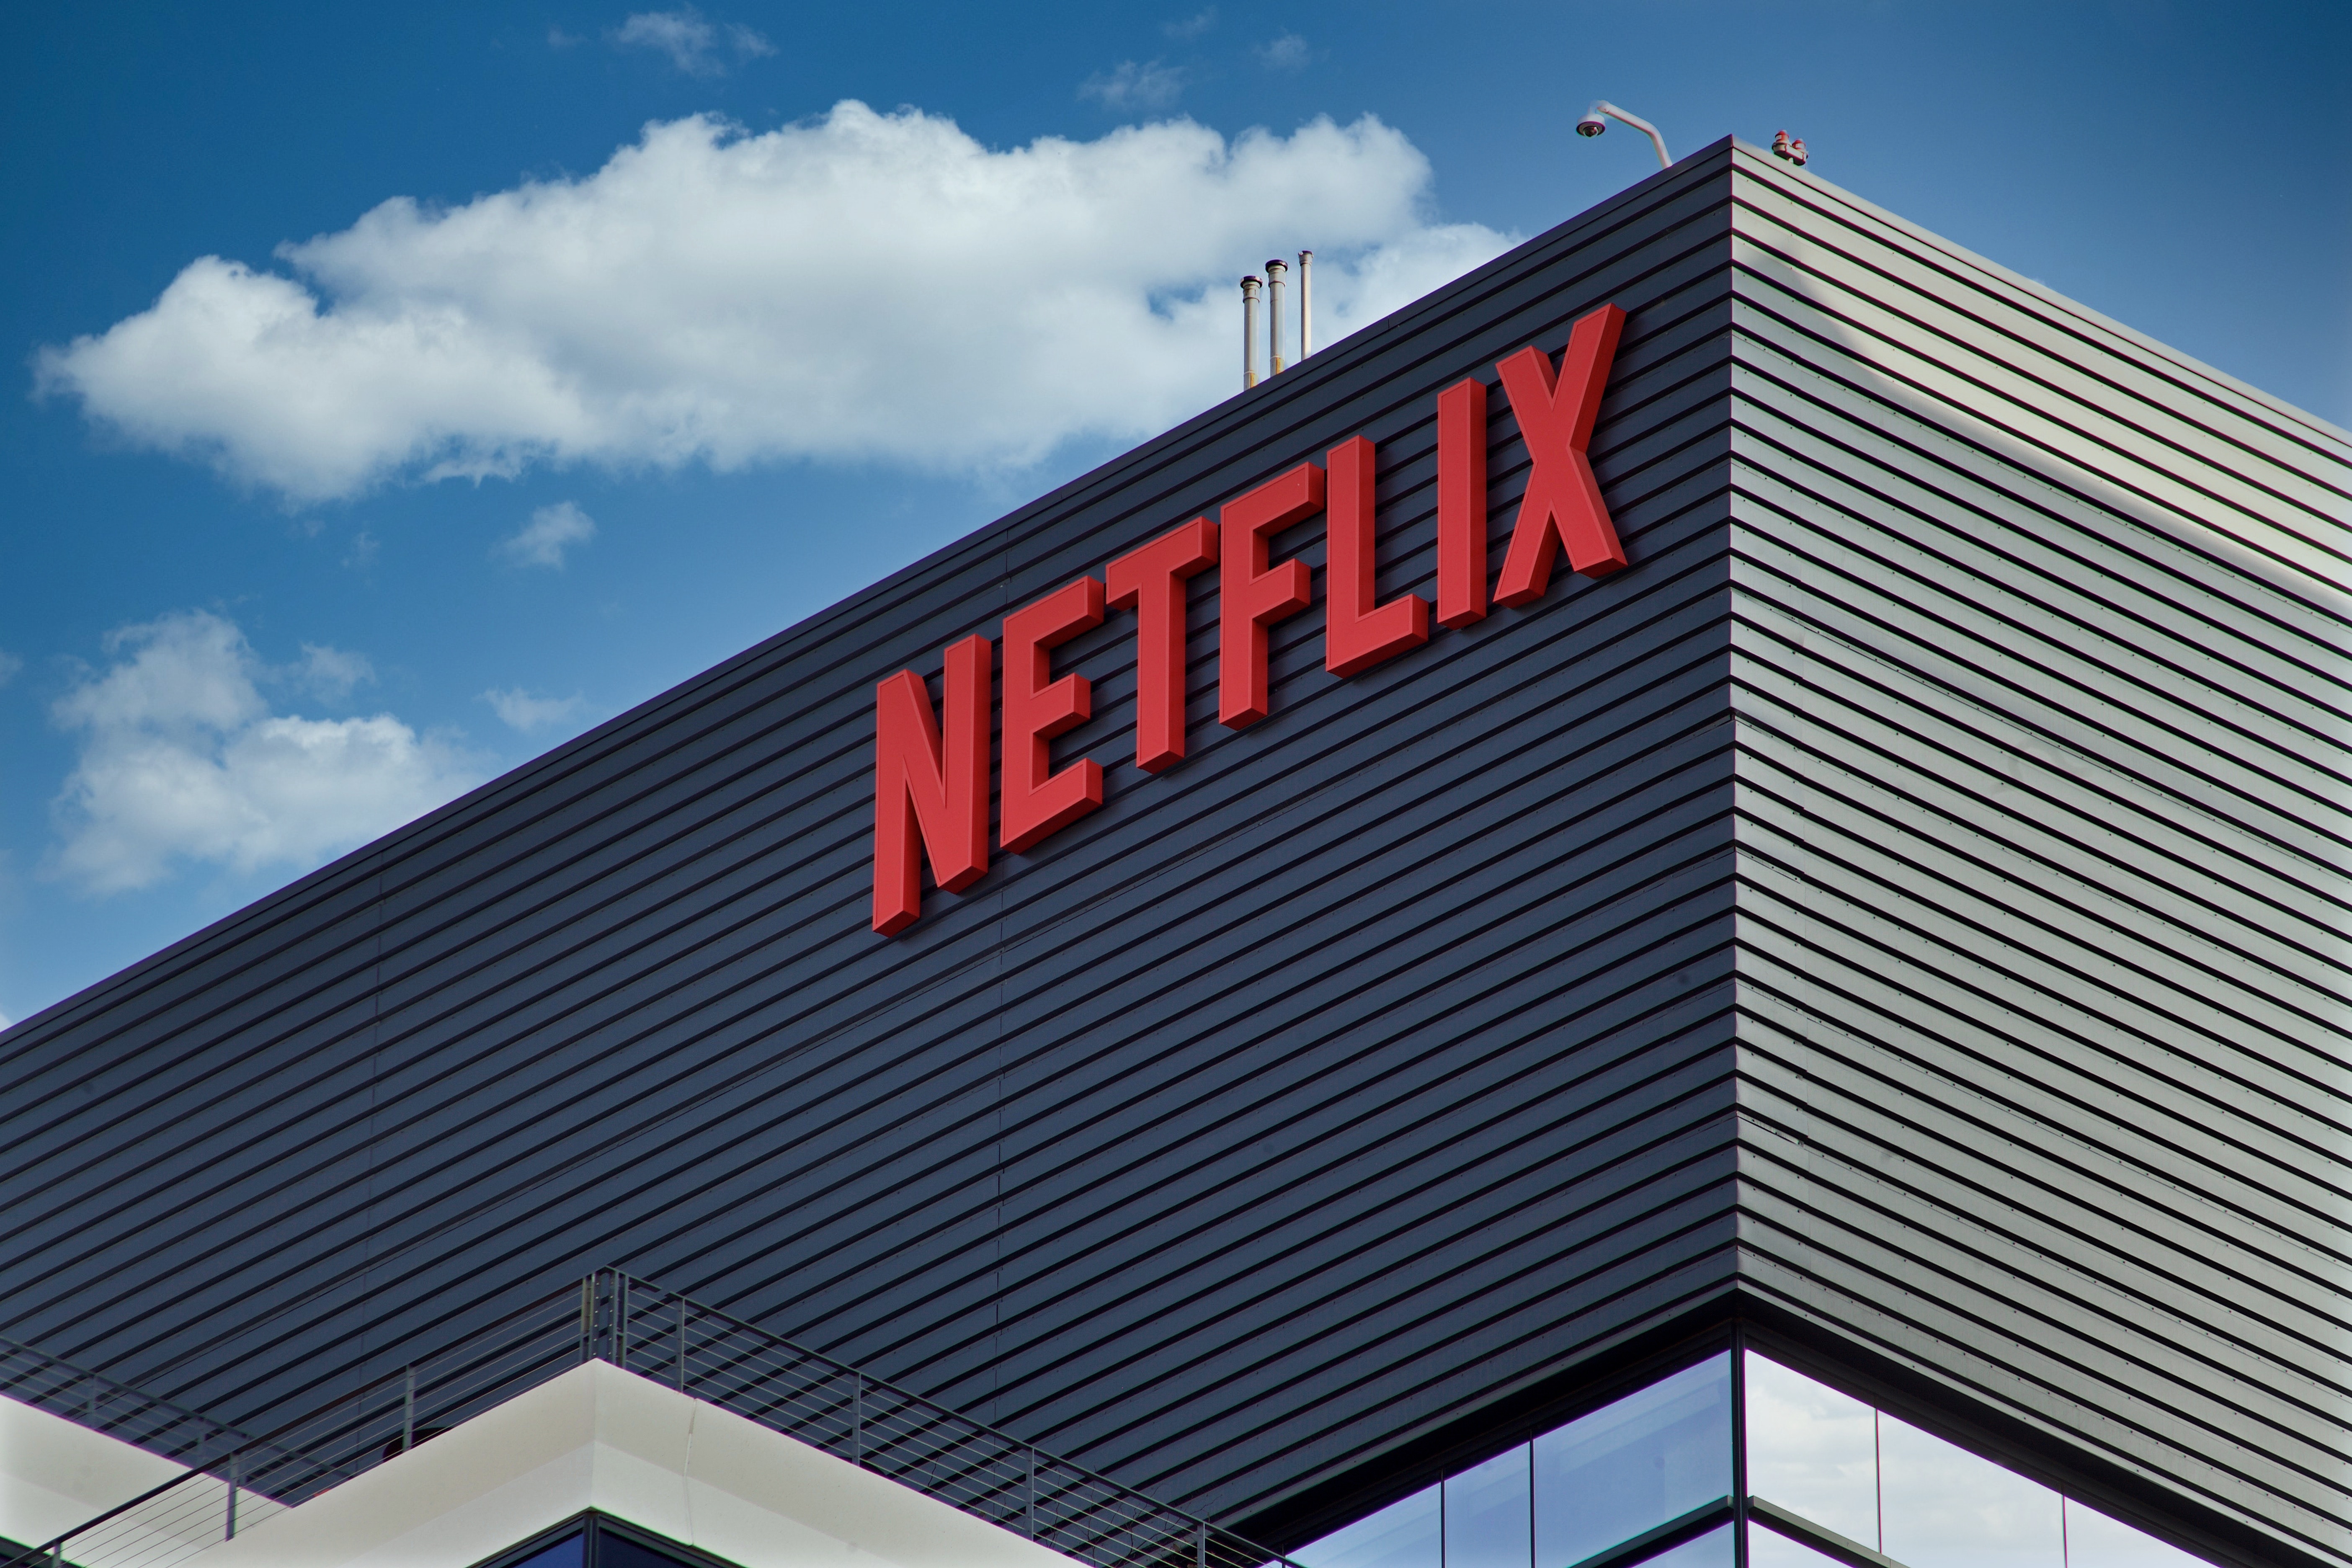 10 Surprises From Netflix's Earnings Report: Advertising Plan, No More Sub Guidance, Movie Theater Strategy And More